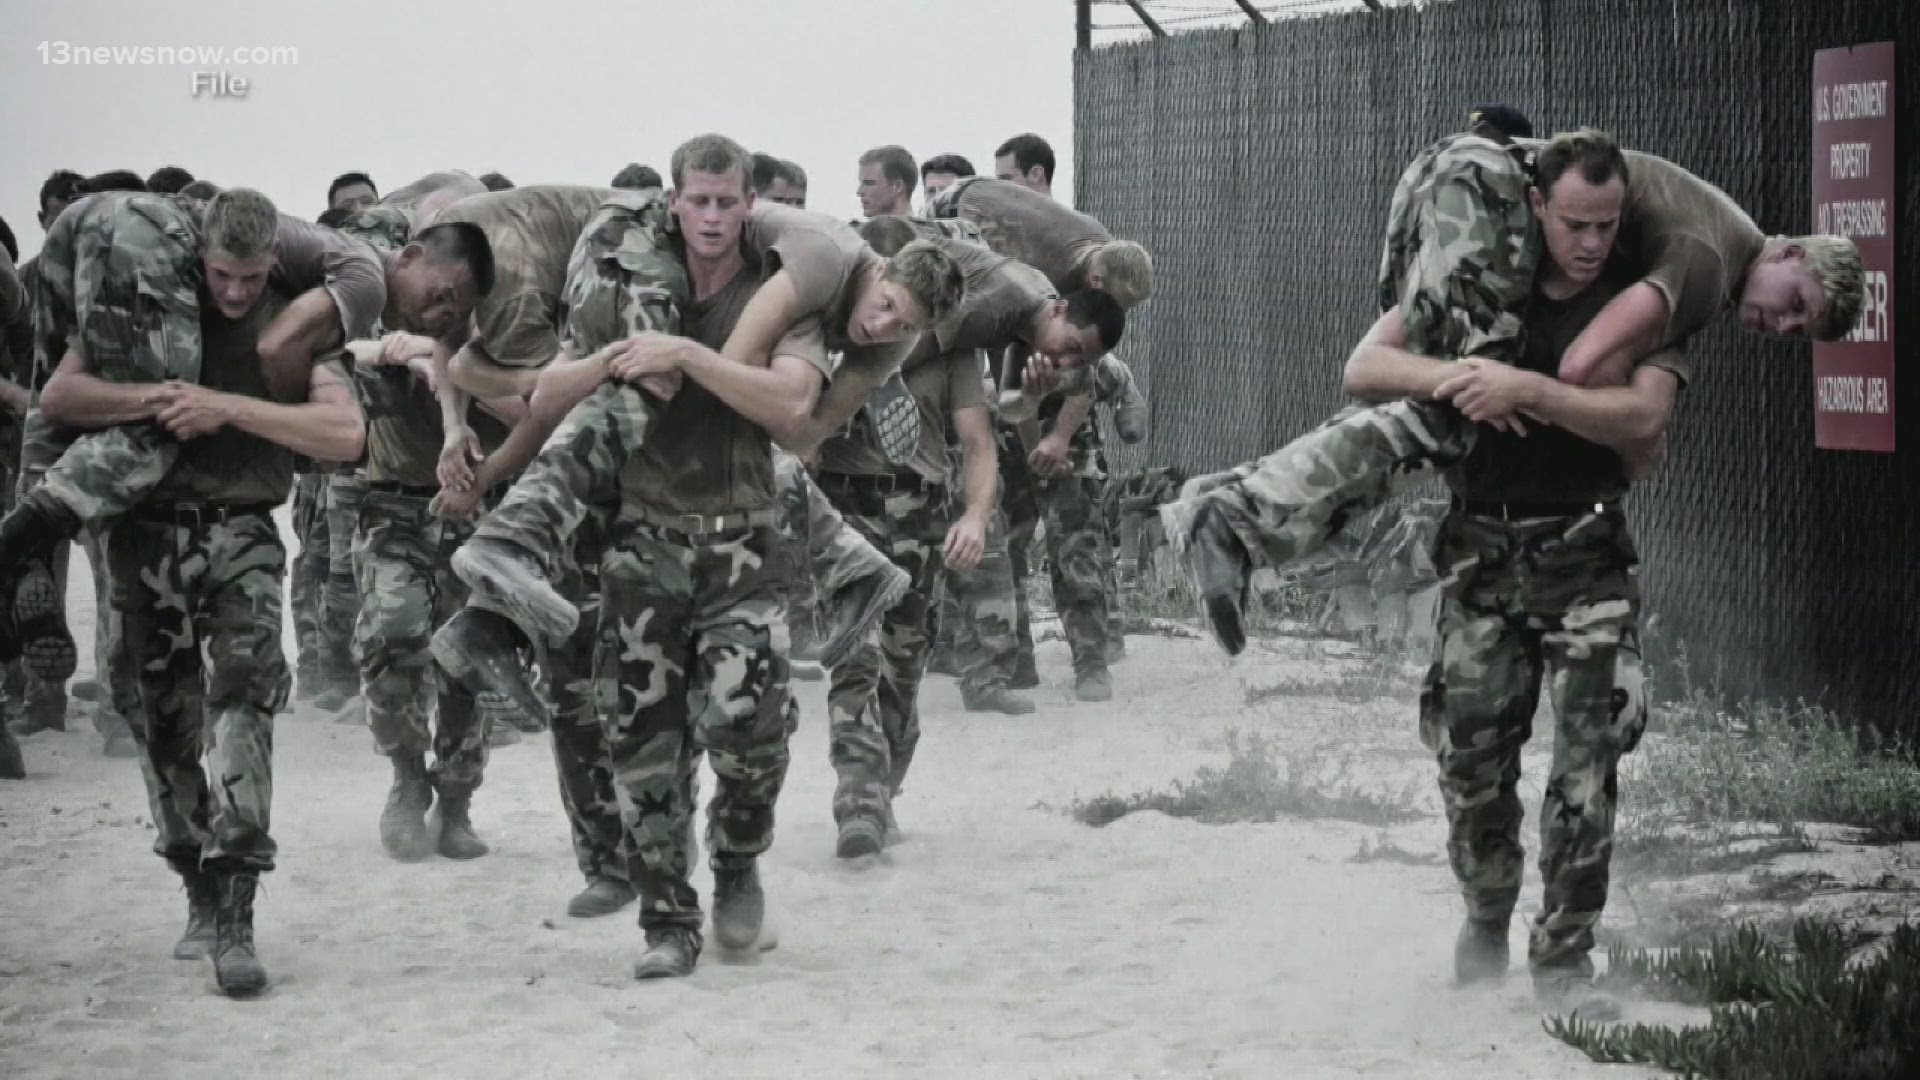 A new report has revealed an "unsafe" and "dangerous" environment for Navy SEAL recruits.